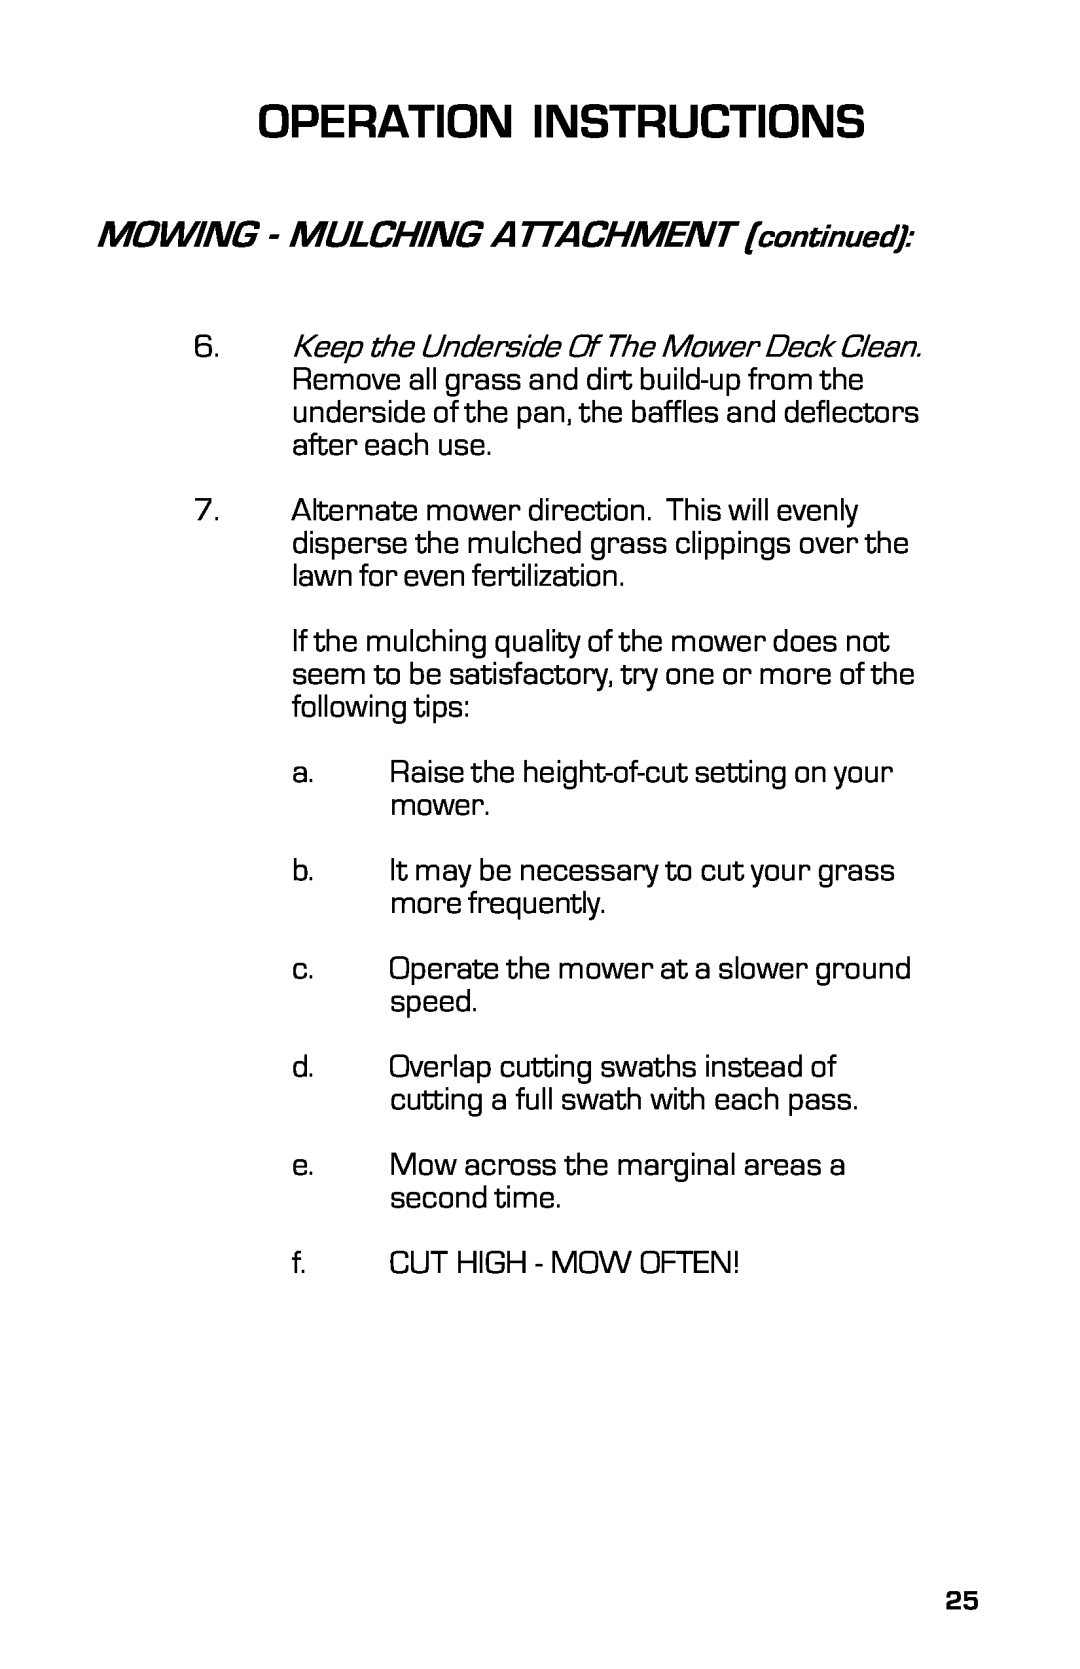 Dixon 3500 Series manual MOWING - MULCHING ATTACHMENT continued, Operation Instructions 